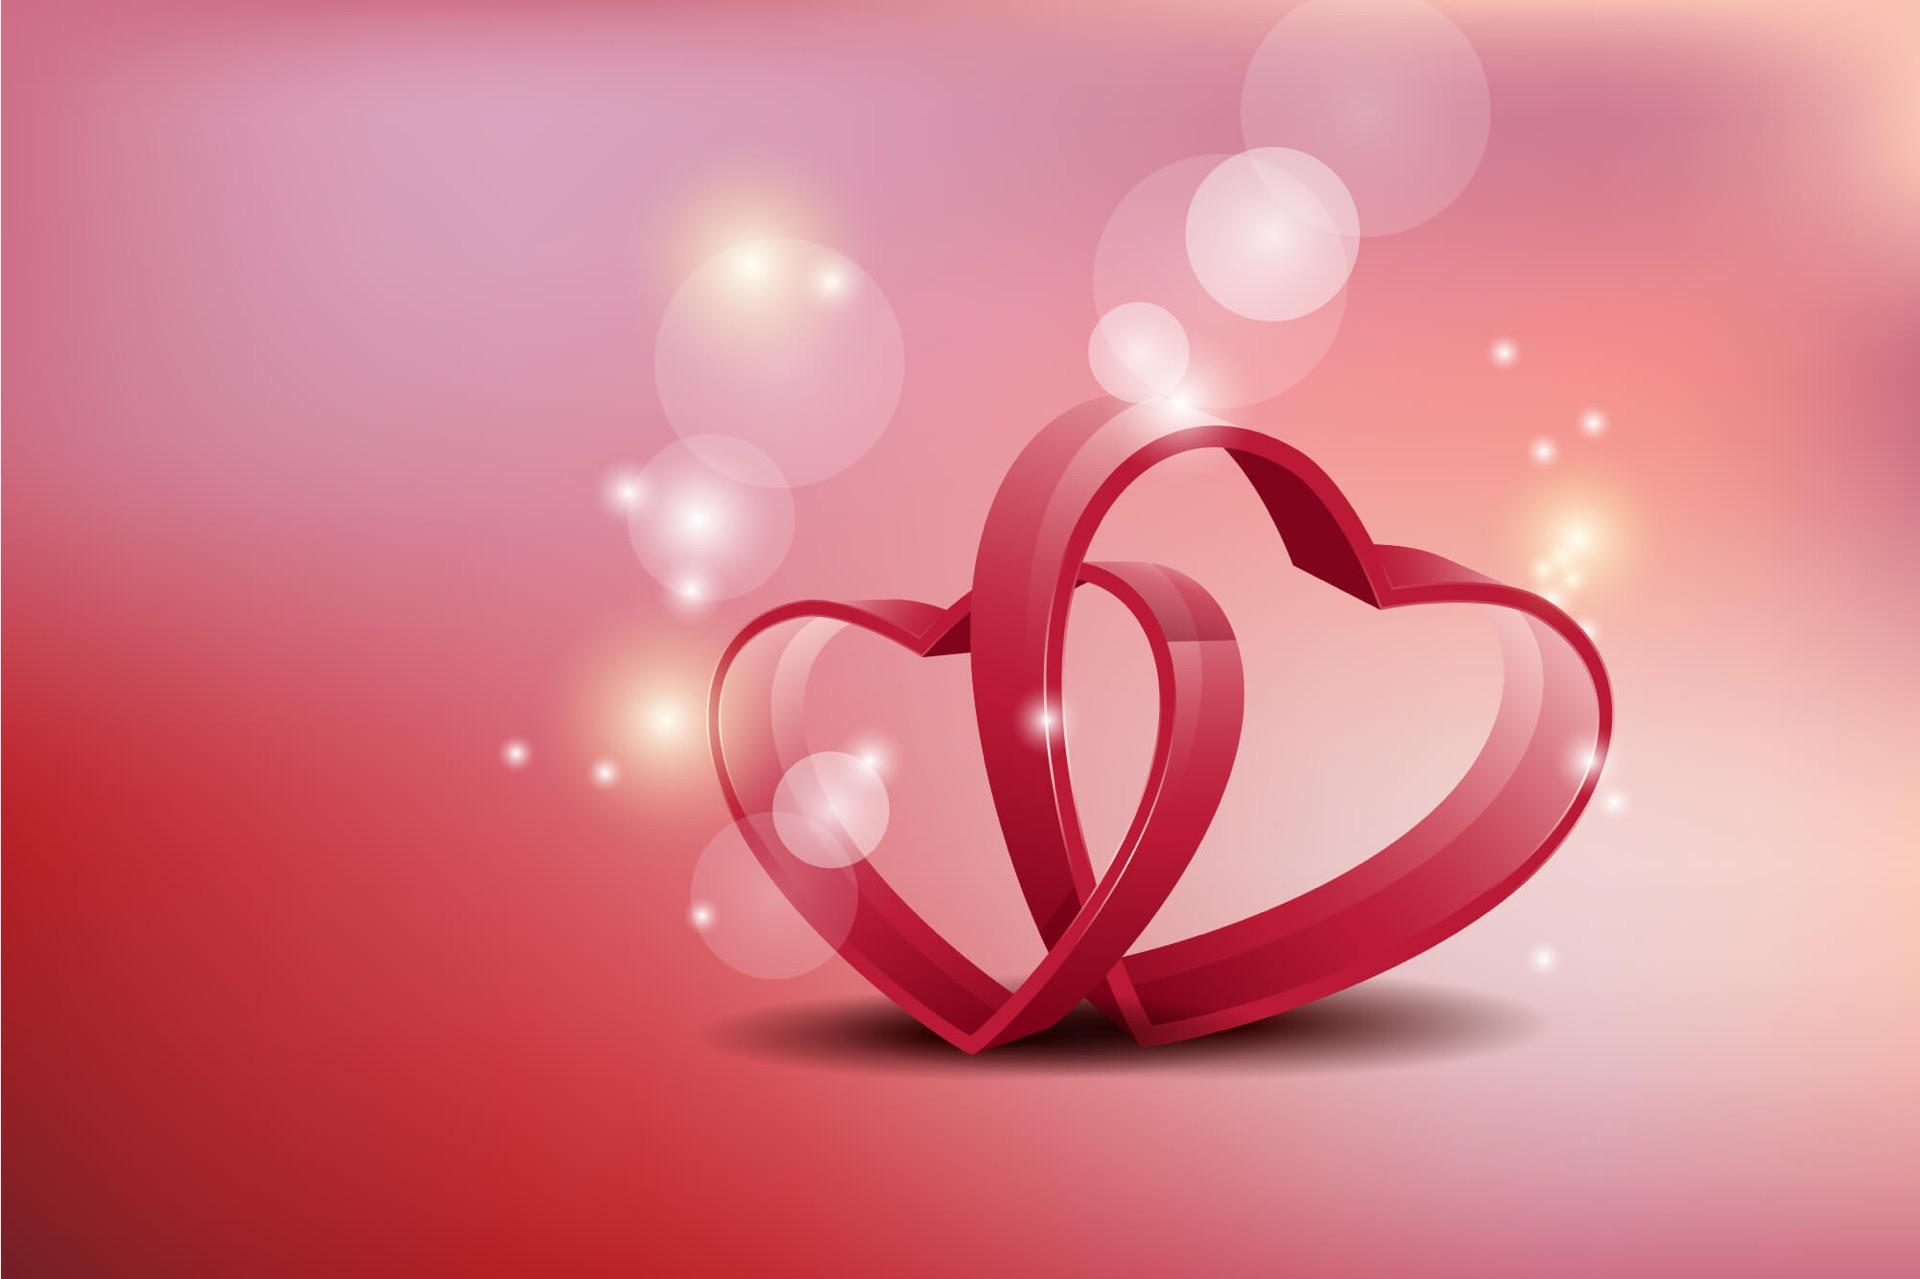 Romantic Valentines Getaway graphic of 2 entwined hearts with spheres and starts glowing all around.